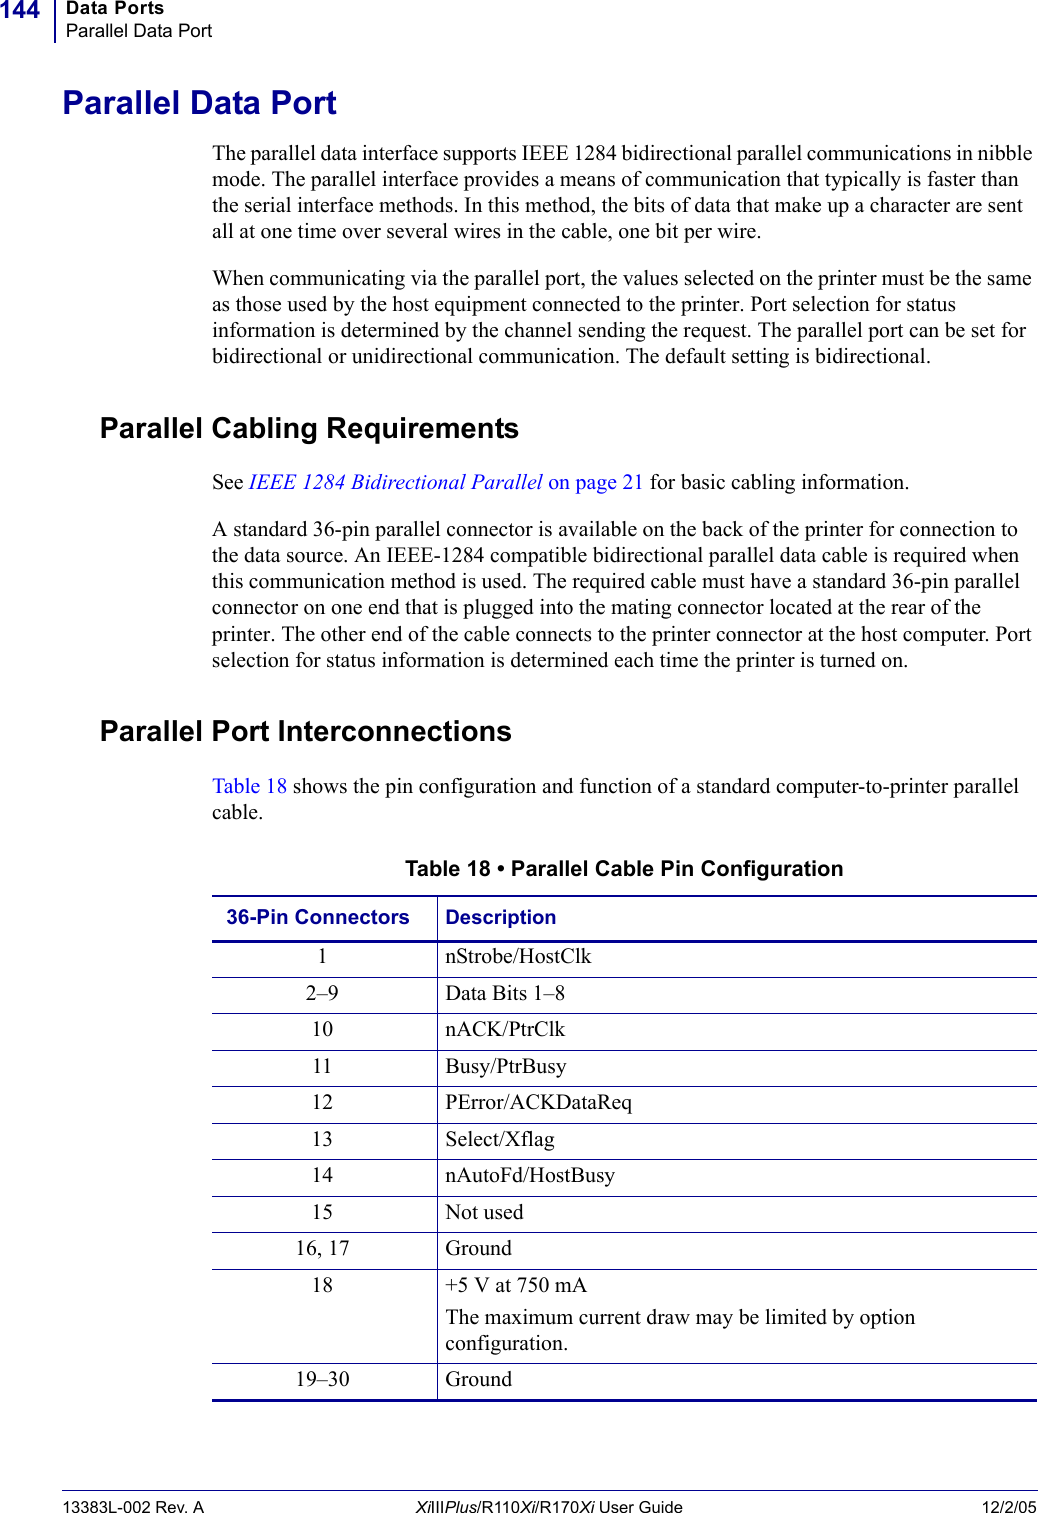 Data PortsParallel Data Port14413383L-002 Rev. A XiIIIPlus/R110Xi/R170Xi User Guide 12/2/05Parallel Data PortThe parallel data interface supports IEEE 1284 bidirectional parallel communications in nibble mode. The parallel interface provides a means of communication that typically is faster than the serial interface methods. In this method, the bits of data that make up a character are sent all at one time over several wires in the cable, one bit per wire.When communicating via the parallel port, the values selected on the printer must be the same as those used by the host equipment connected to the printer. Port selection for status information is determined by the channel sending the request. The parallel port can be set for bidirectional or unidirectional communication. The default setting is bidirectional.Parallel Cabling RequirementsSee IEEE 1284 Bidirectional Parallel on page 21 for basic cabling information.A standard 36-pin parallel connector is available on the back of the printer for connection to the data source. An IEEE-1284 compatible bidirectional parallel data cable is required when this communication method is used. The required cable must have a standard 36-pin parallel connector on one end that is plugged into the mating connector located at the rear of the printer. The other end of the cable connects to the printer connector at the host computer. Port selection for status information is determined each time the printer is turned on.Parallel Port InterconnectionsTable 18 shows the pin configuration and function of a standard computer-to-printer parallel cable.Table 18 • Parallel Cable Pin Configuration36-Pin Connectors Description1 nStrobe/HostClk2–9 Data Bits 1–810 nACK/PtrClk11 Busy/PtrBusy12 PError/ACKDataReq13 Select/Xflag14 nAutoFd/HostBusy15 Not used16, 17 Ground18 +5 V at 750 mAThe maximum current draw may be limited by option configuration.19–30 Ground